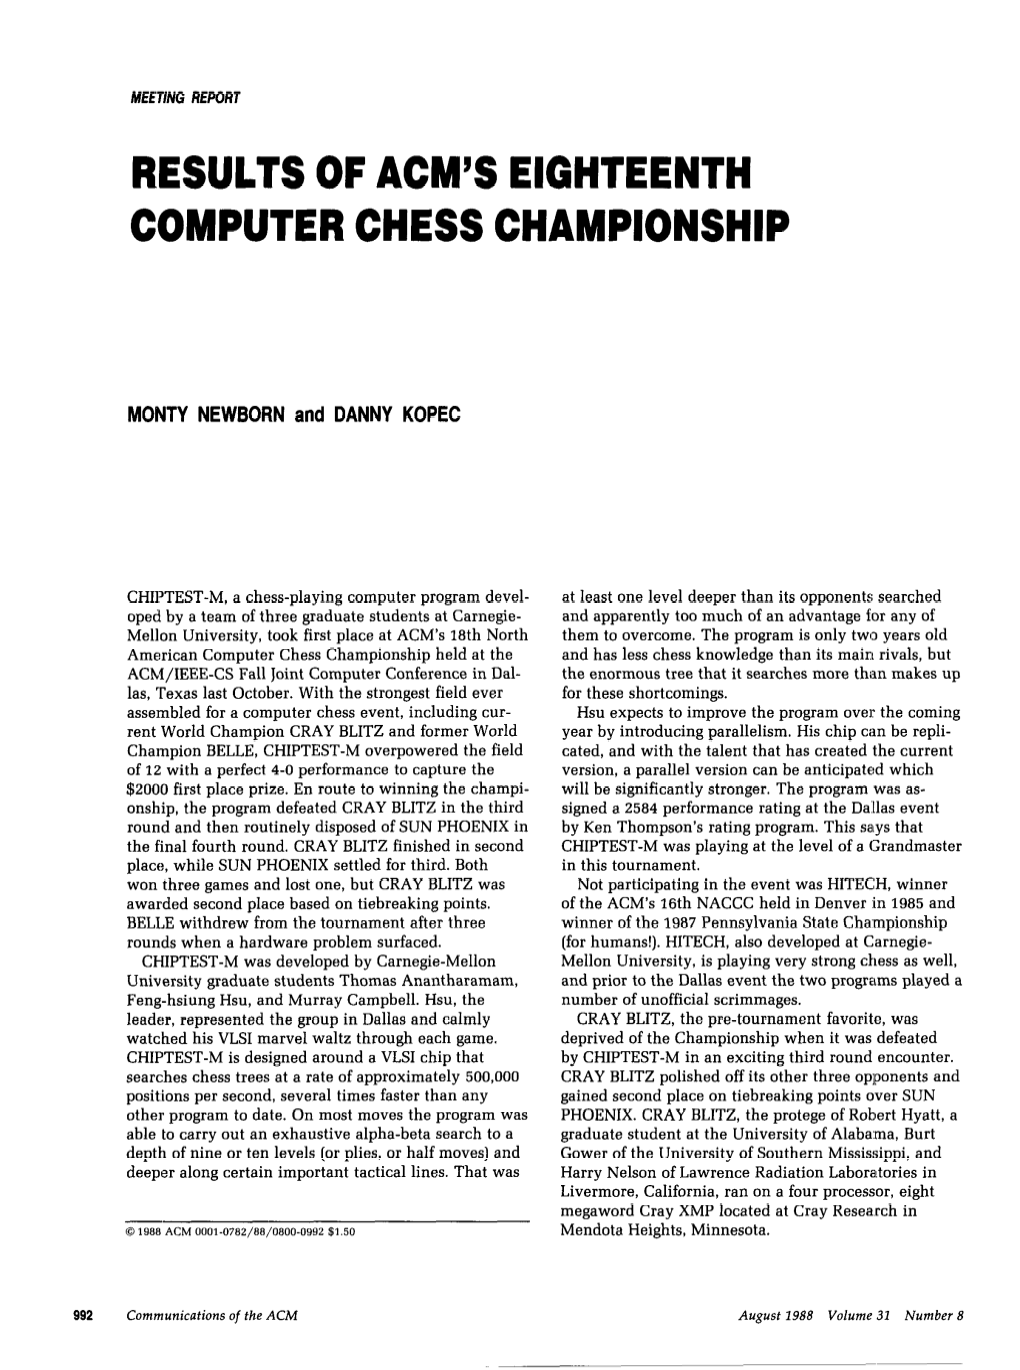 Results of Acm's Eighteenth Computer Chess